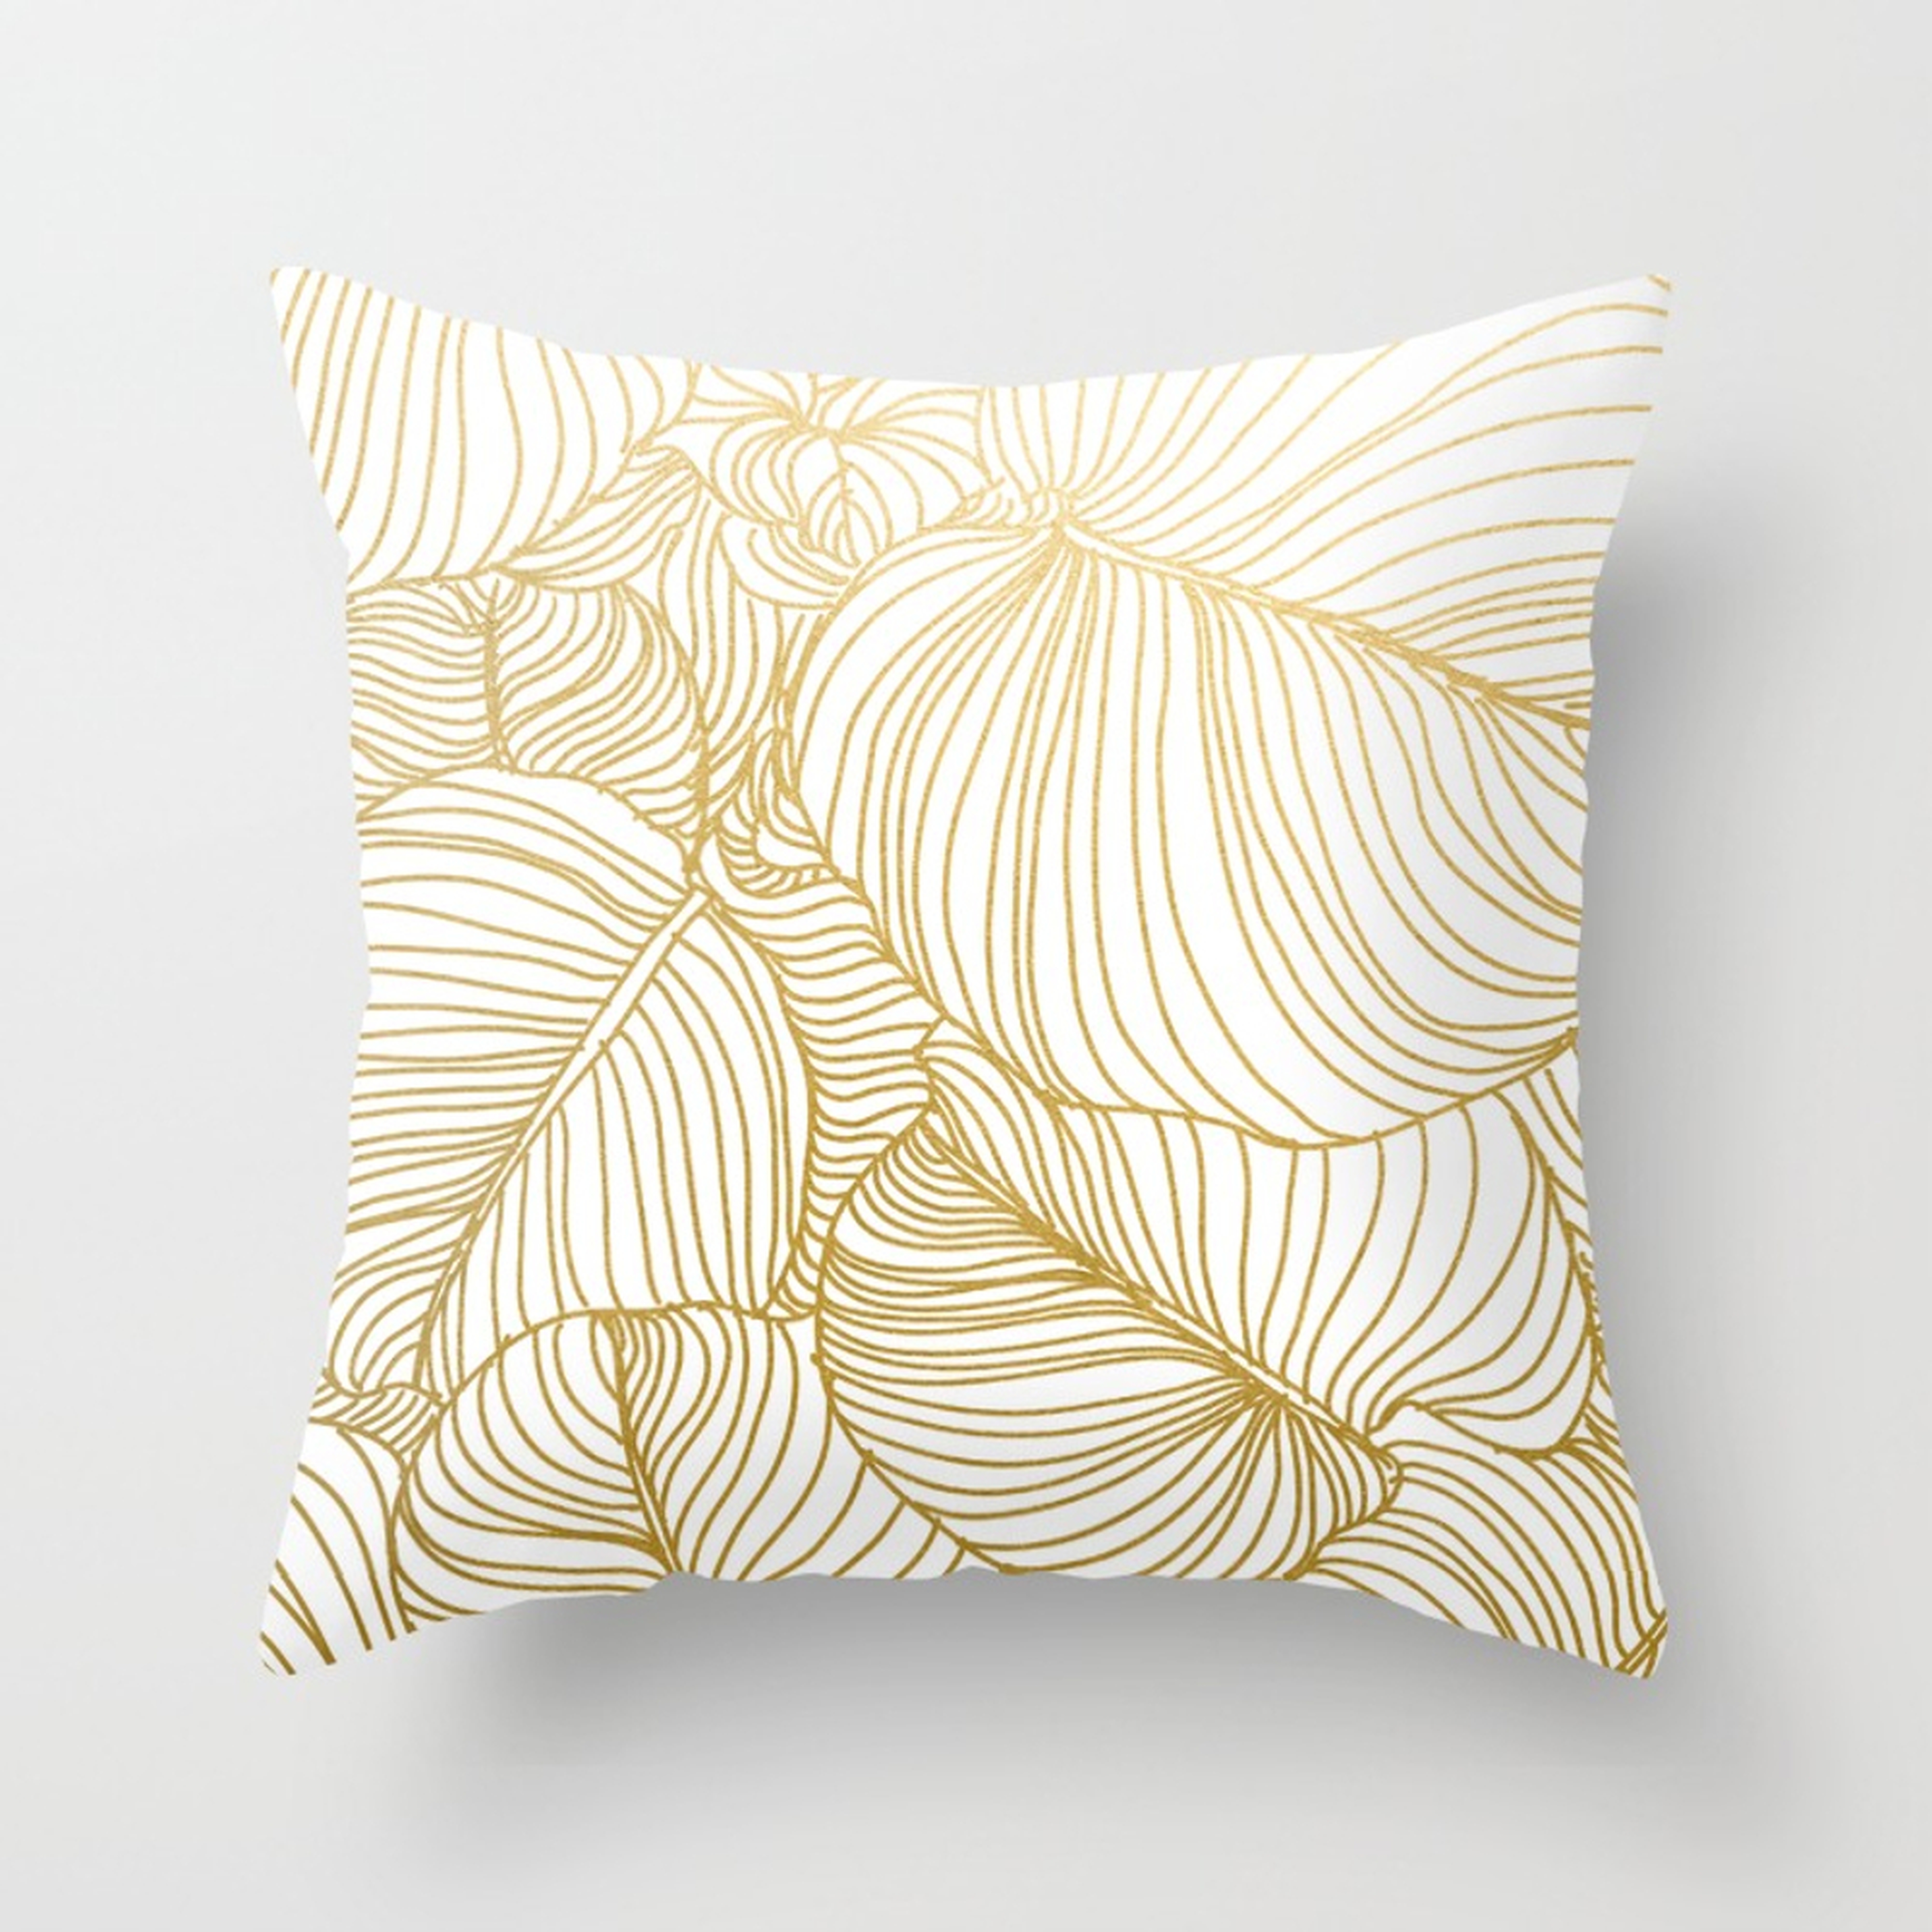 Wilderness Gold Throw Pillow - Indoor Cover (16" x 16") with pillow insert by 83Oranges - Society6